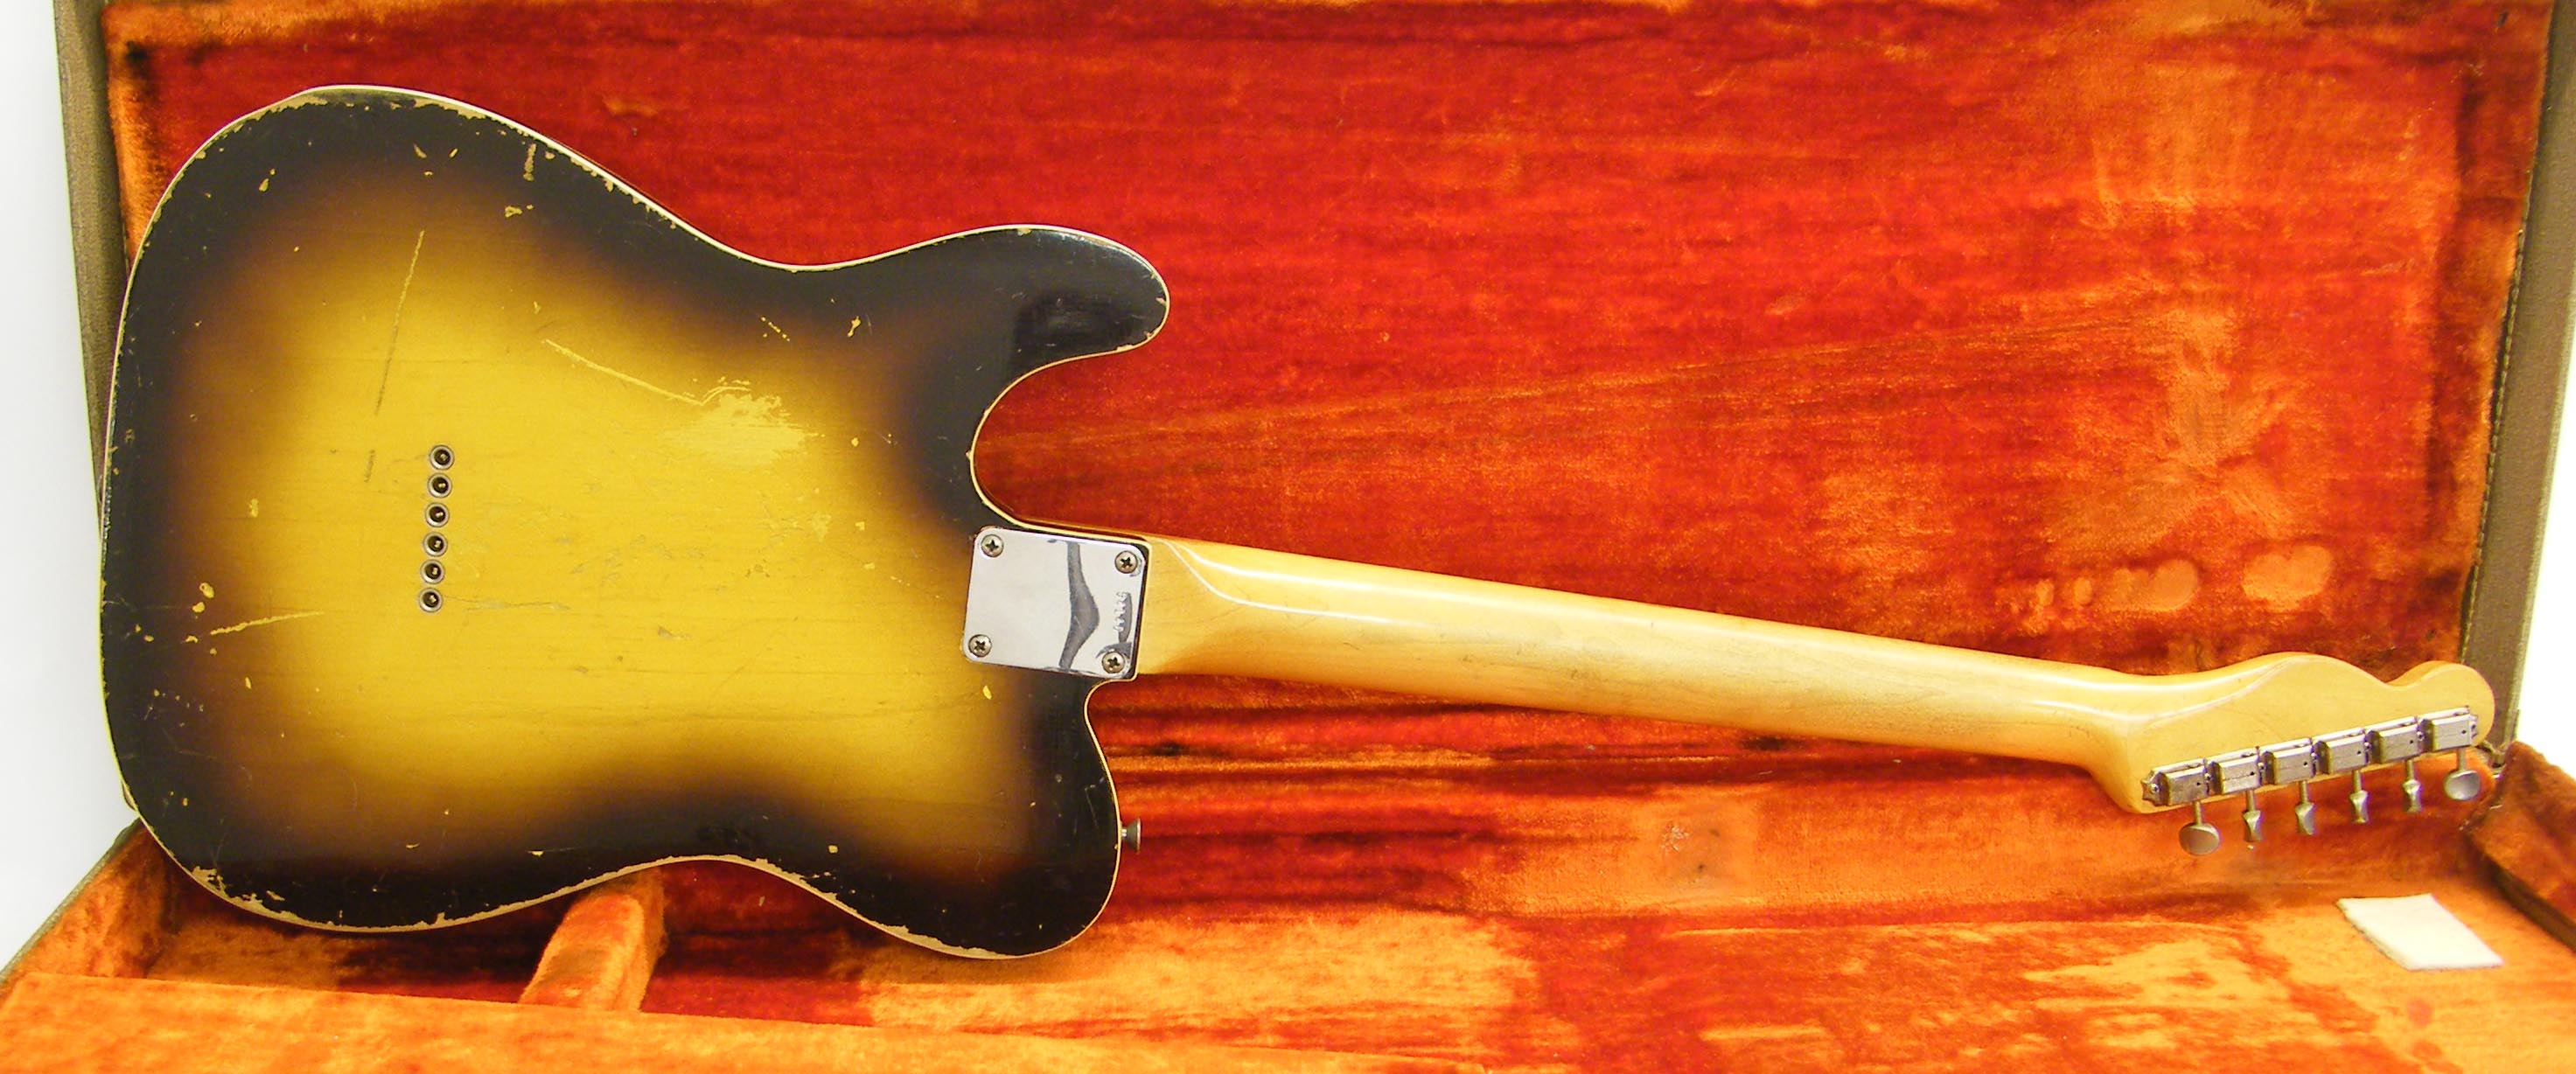 1960 Fender Custom Esquire electric guitar, made in USA, ser. no. 54146, sunburst finish with - Image 2 of 8